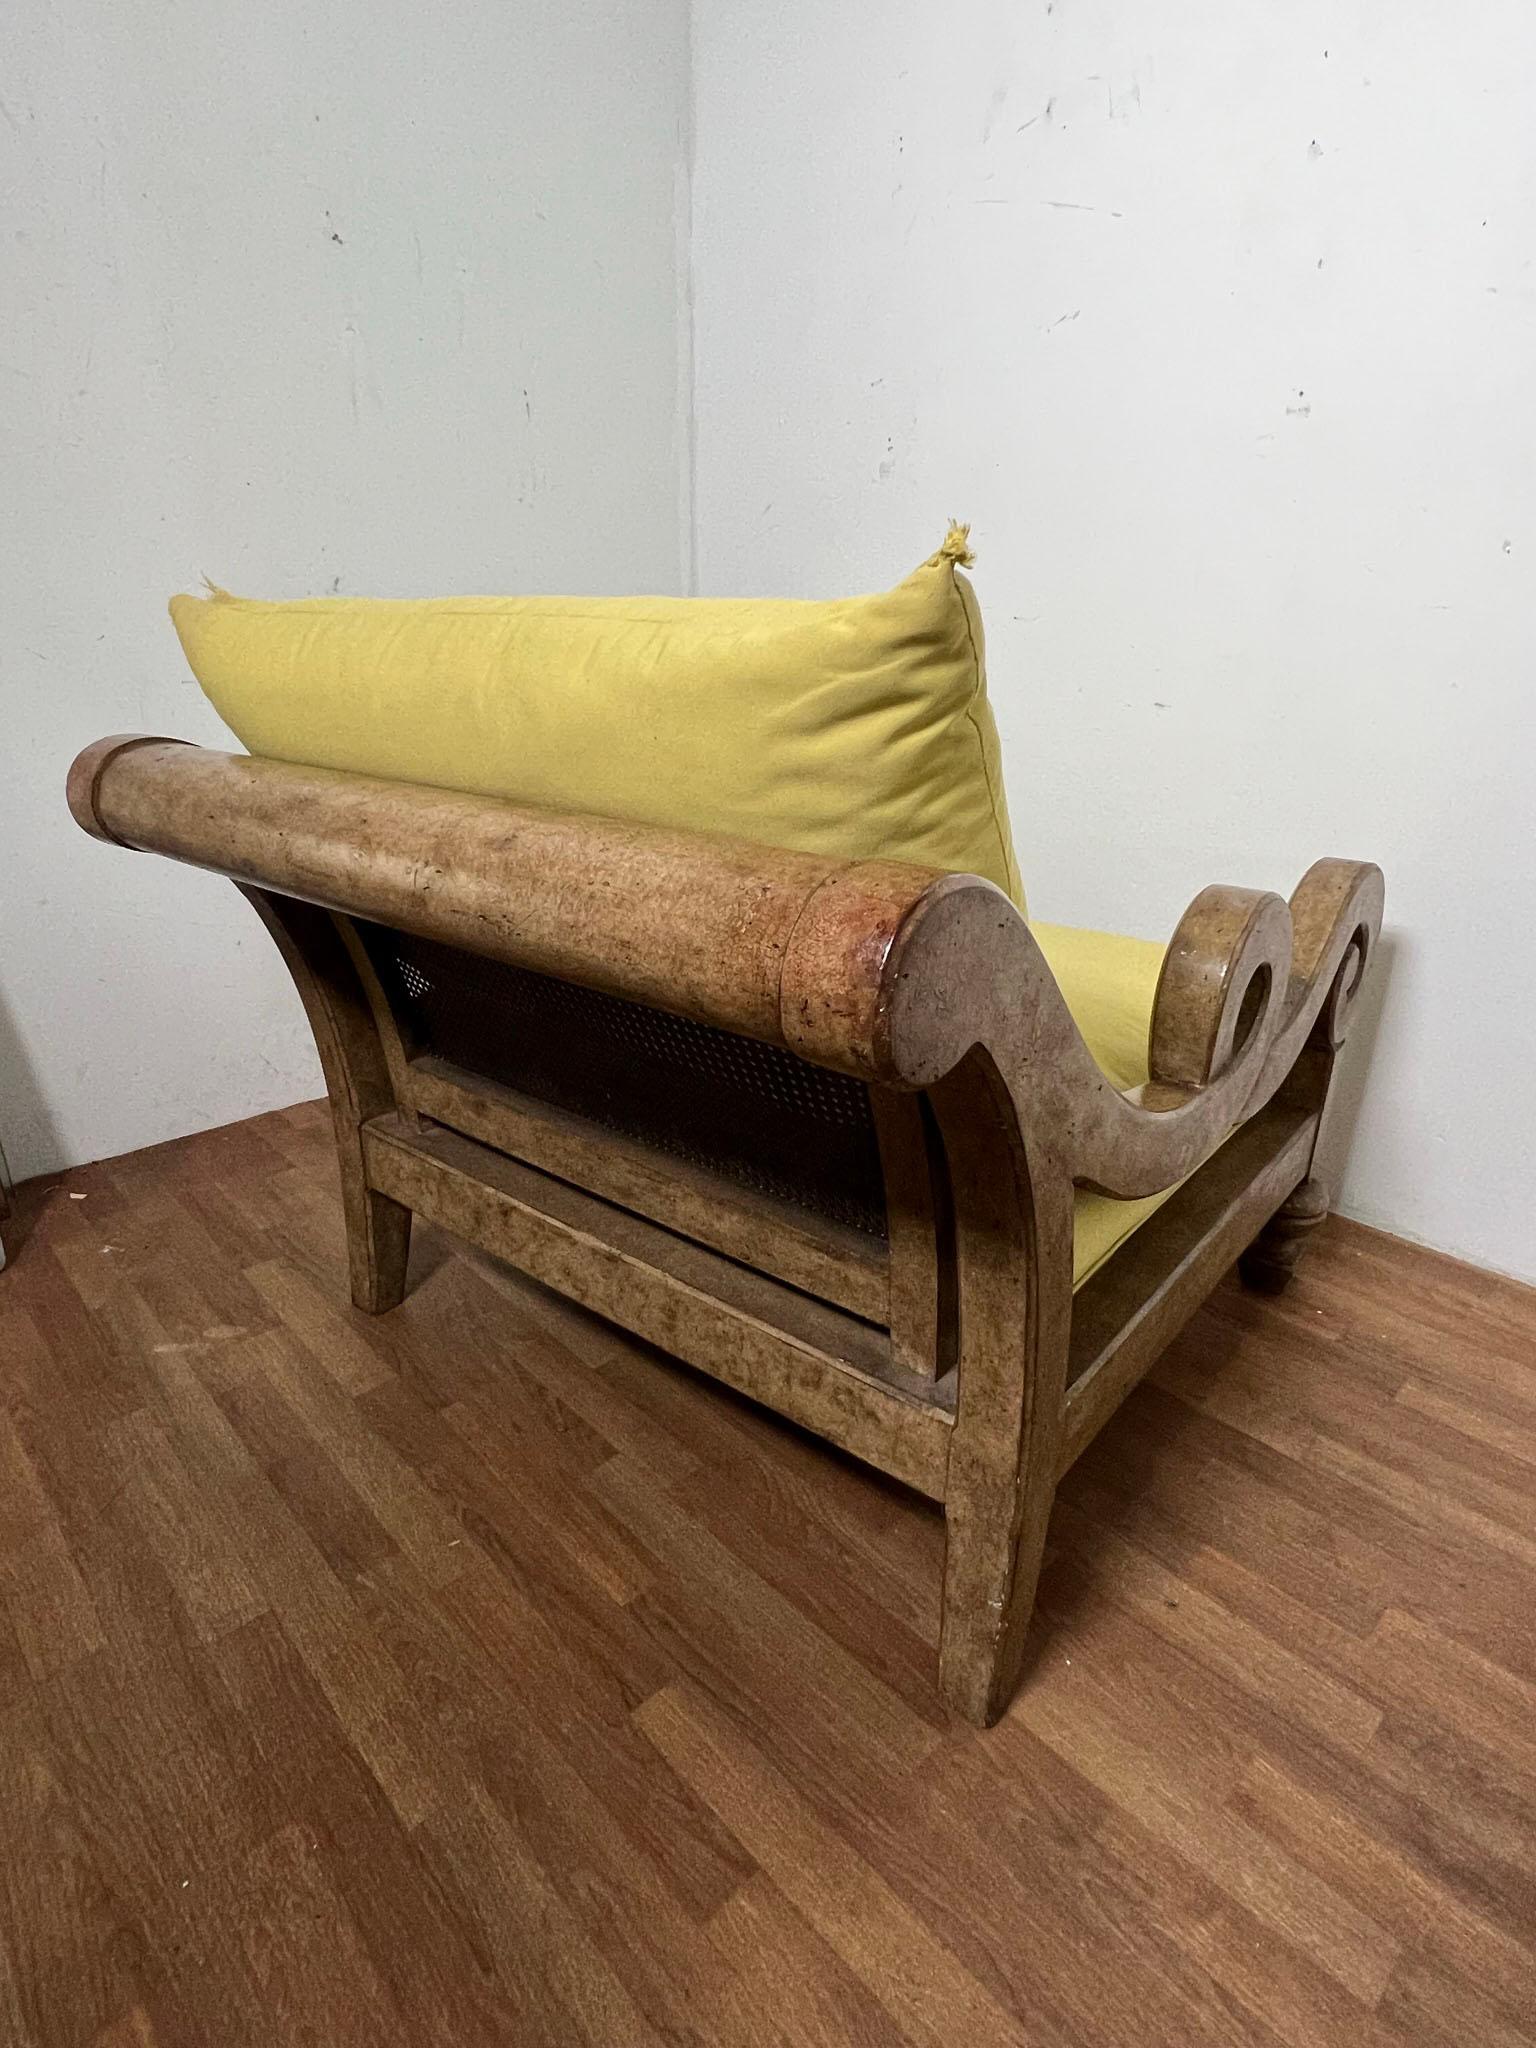 Late 20th Century Marge Carson Oversized Burl Wood and Cane Lounge With Ottoman Circa 1980s For Sale